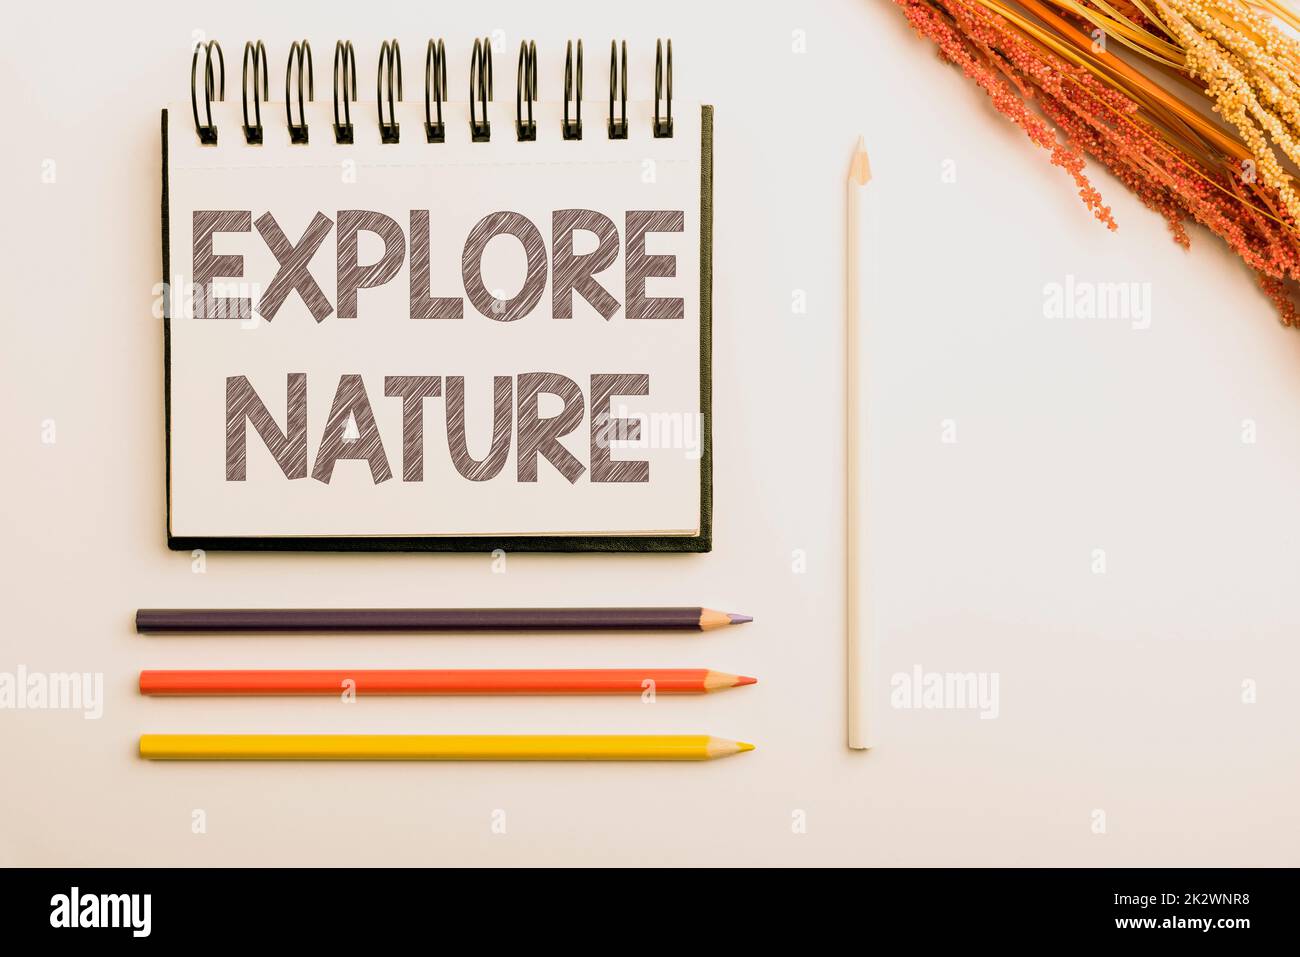 Writing displaying text Explore Nature. Business approach Reserve Campsite Conservation Expedition Safari park Flashy School Office Supplies, Teaching Learning Collections, Writing Tools Stock Photo